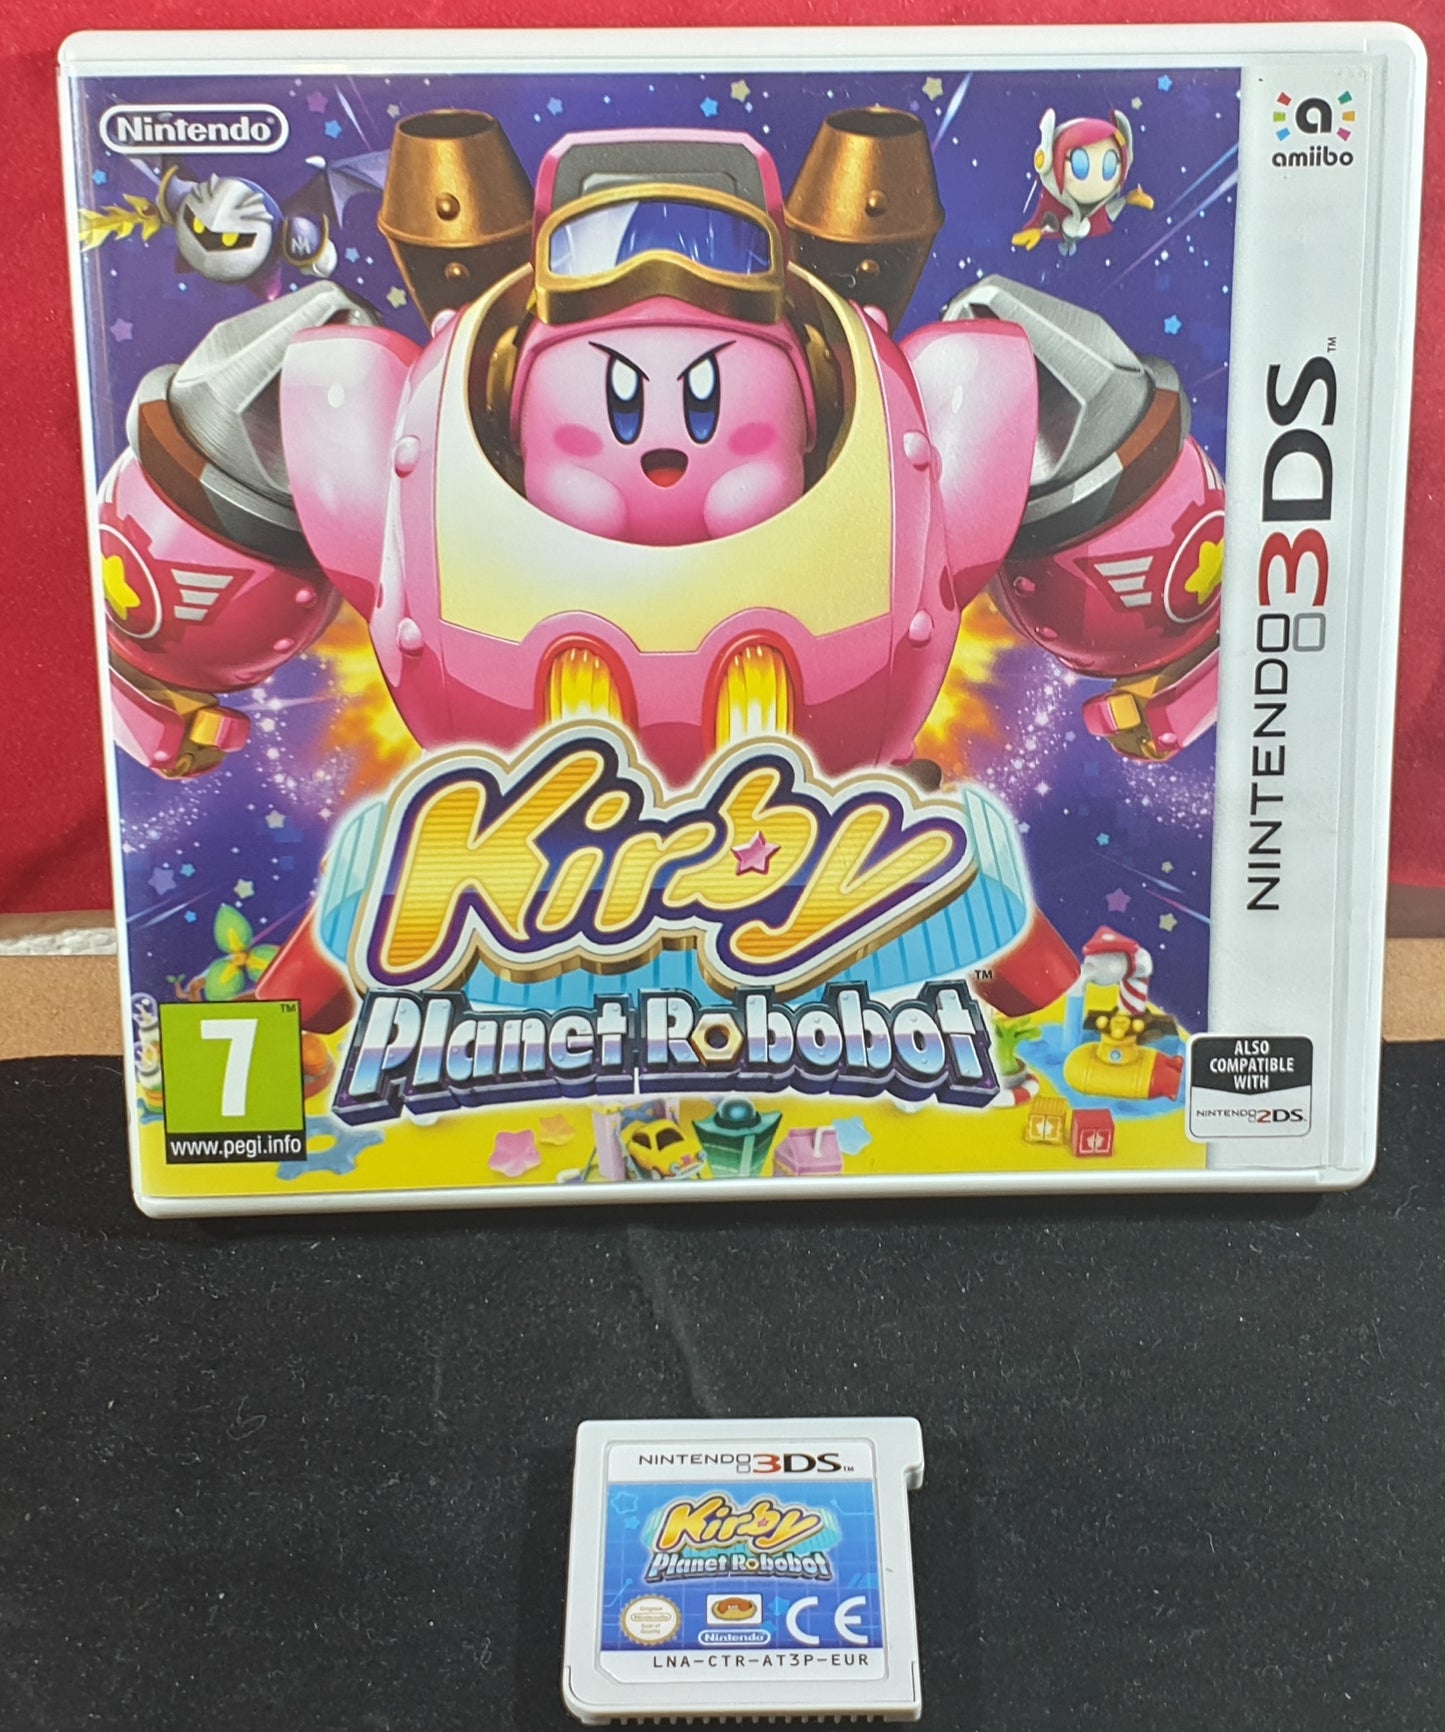 Kirby Planet Robobot (Nintendo 3DS) game